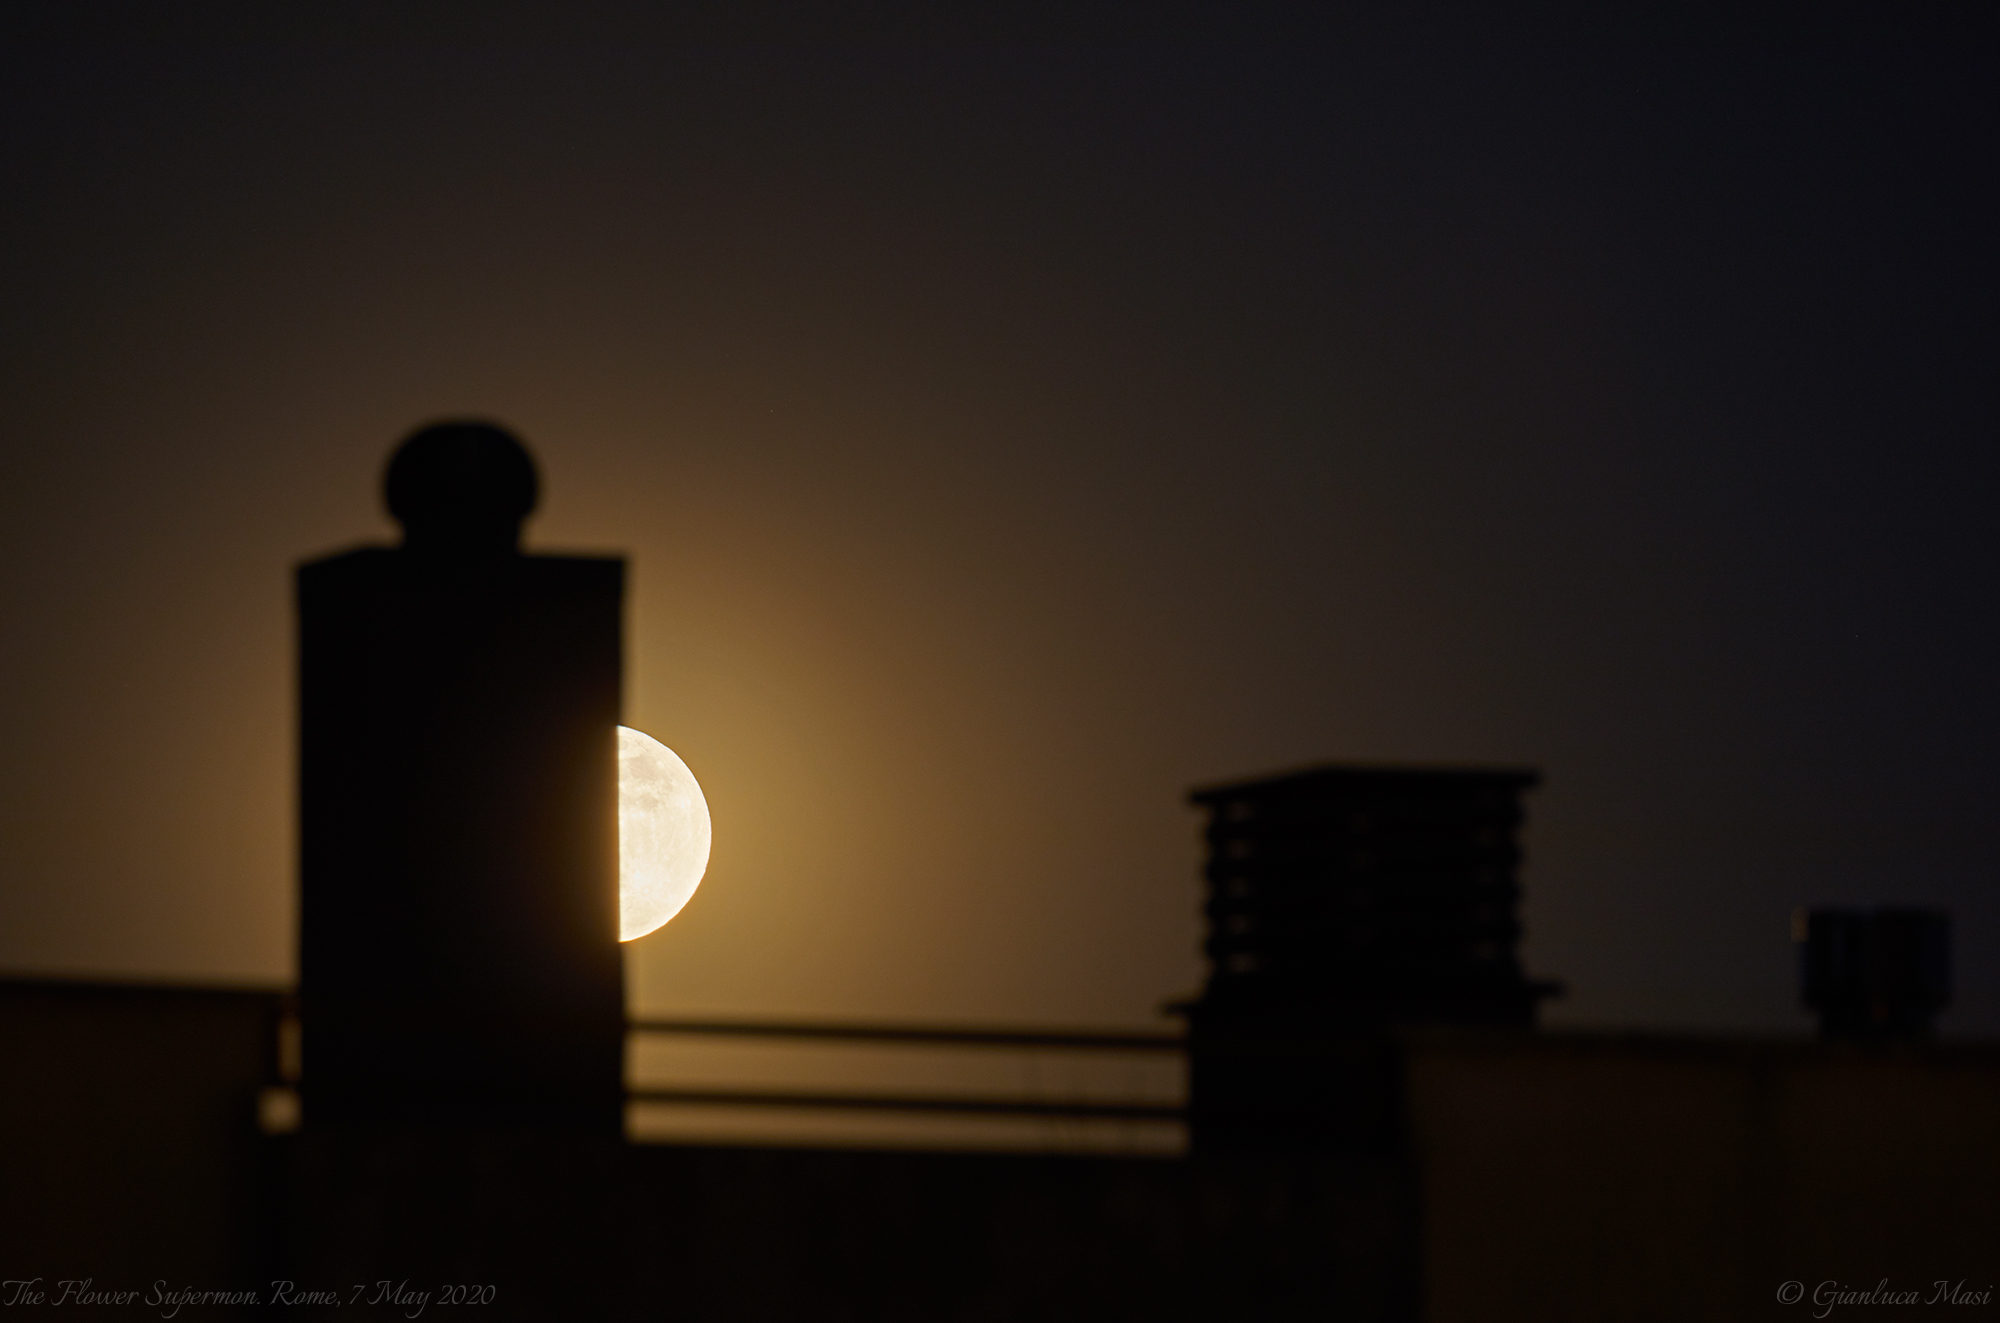 The Flower Supermoon was playing "hide and seek" among the roofs of Rome - 7 May 2020.